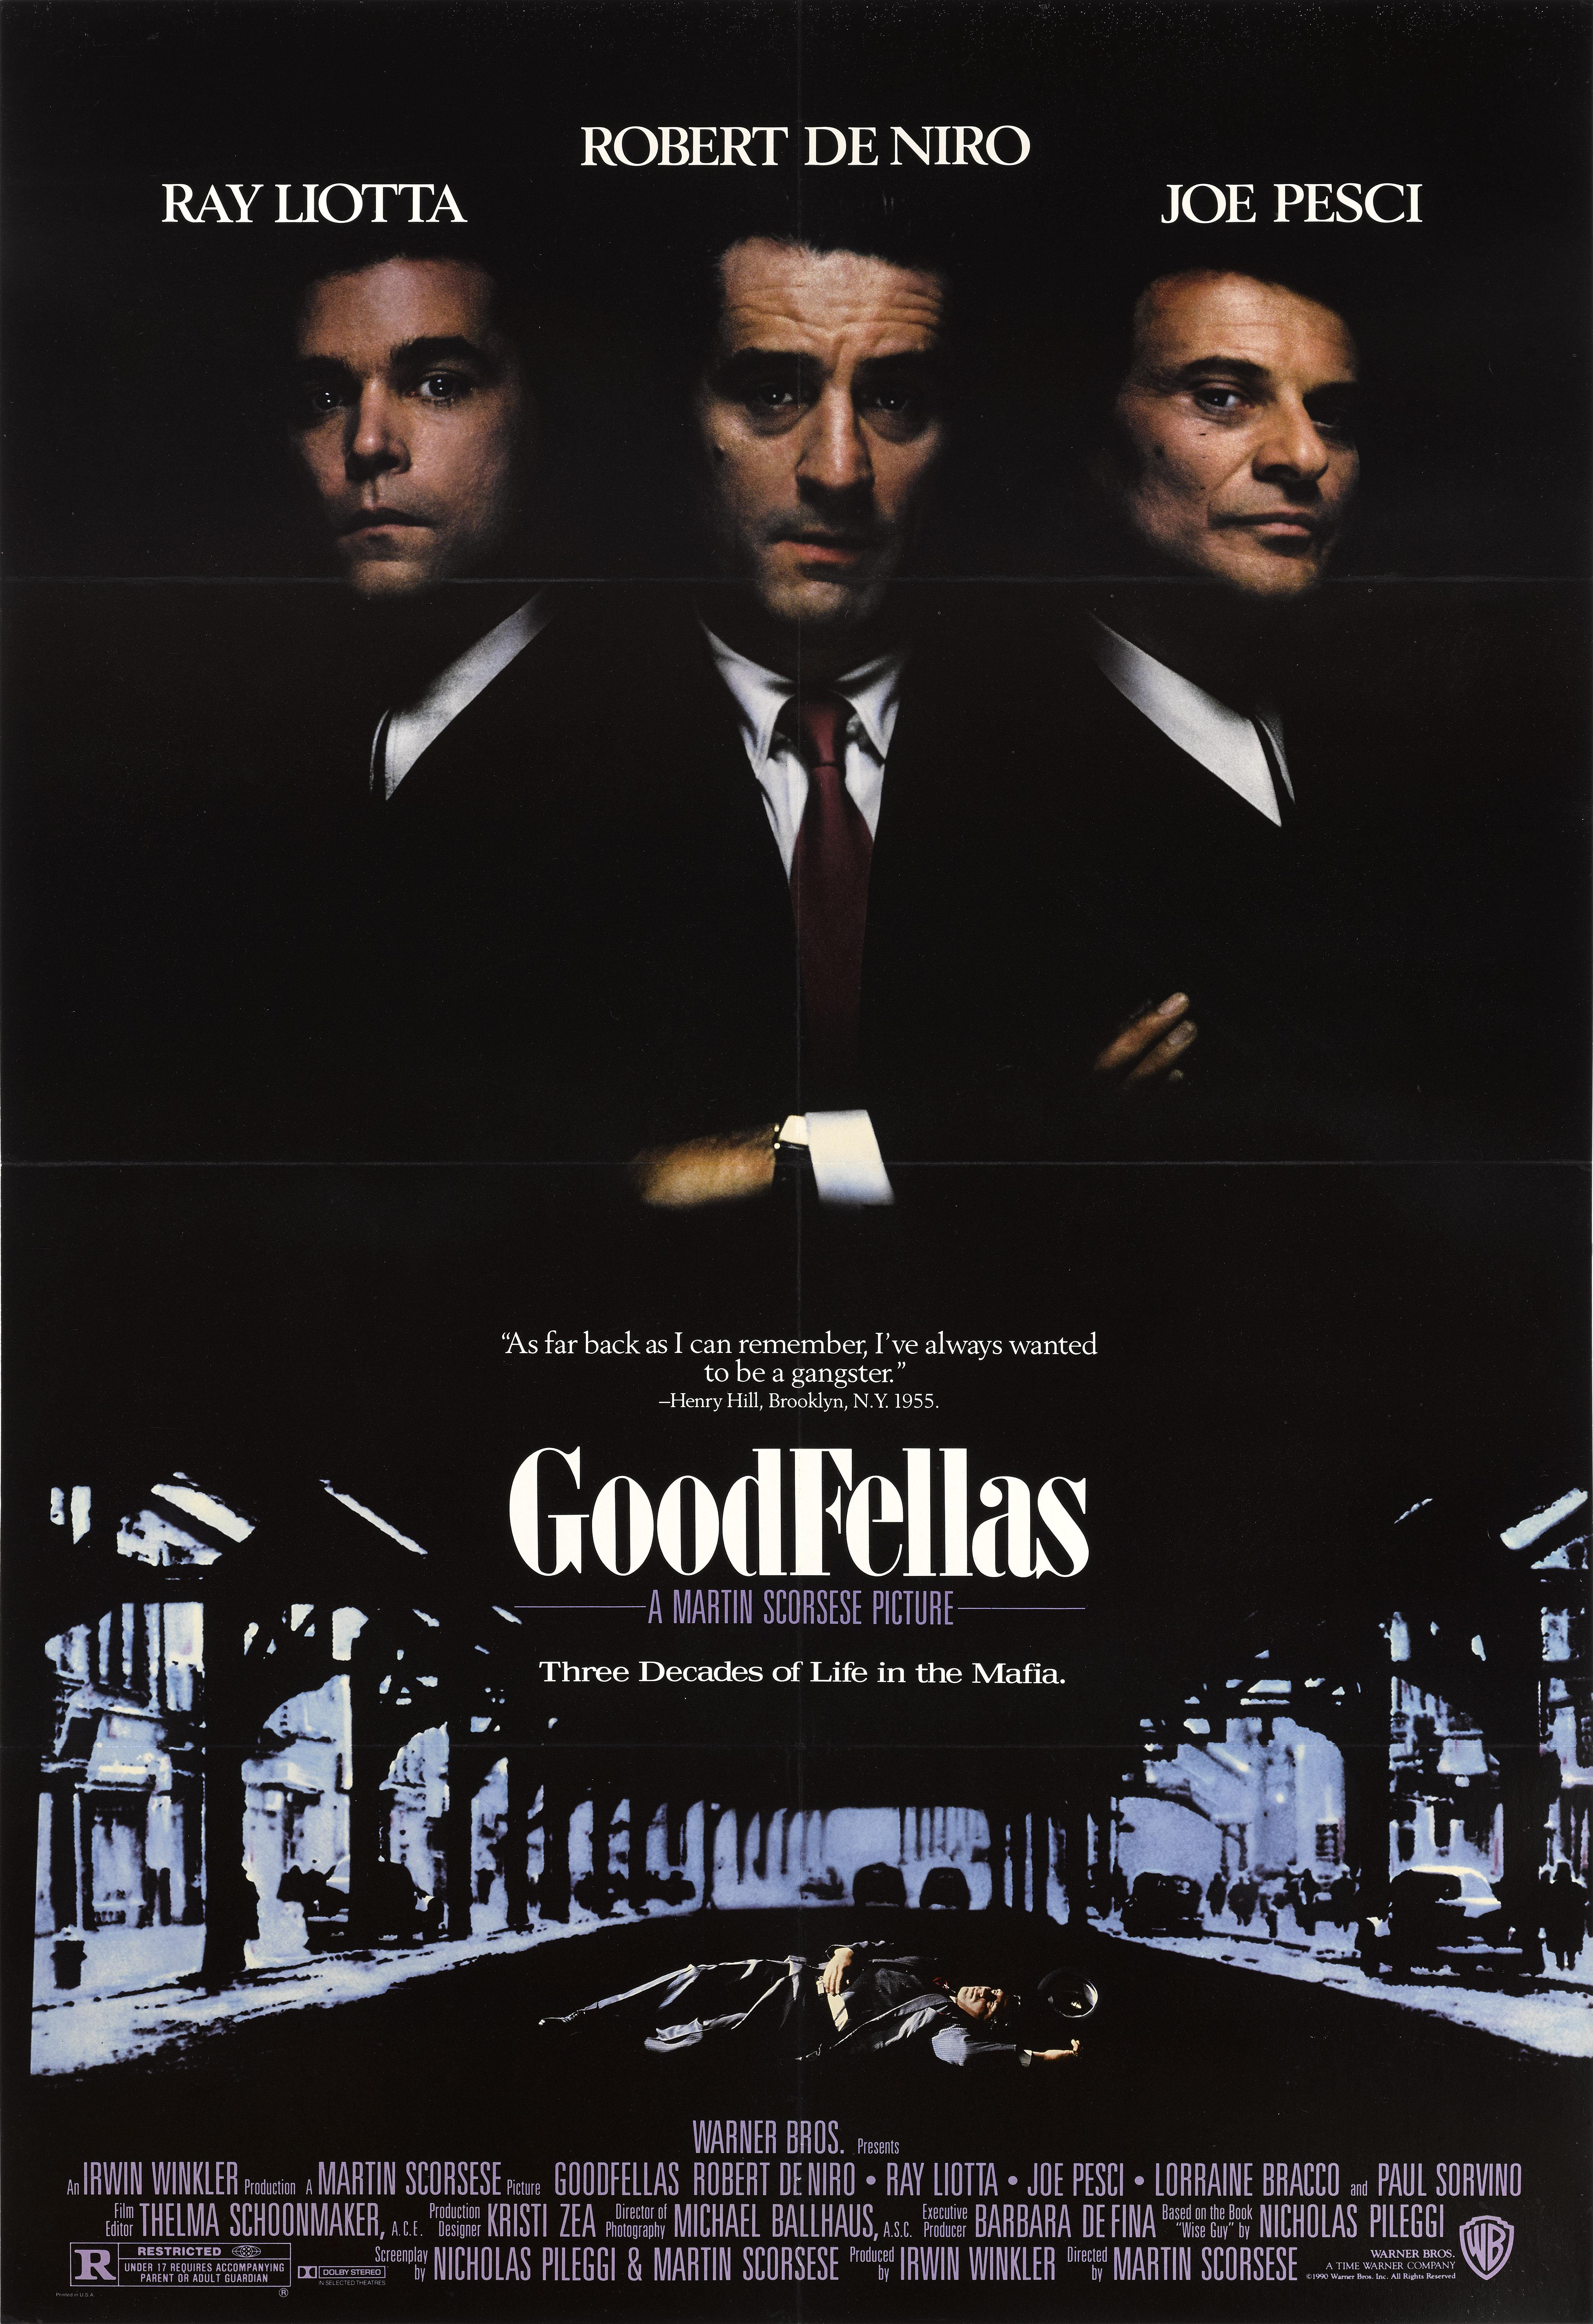 Original US film poster for the 1990 Gangster film directed by Martin Scorsese and starring Robert De Niro, Ray Liotta, Joe Pesci.
This poster is conservation linen backed and it would be shipped rolled by Federal Express in a strong tube.
      